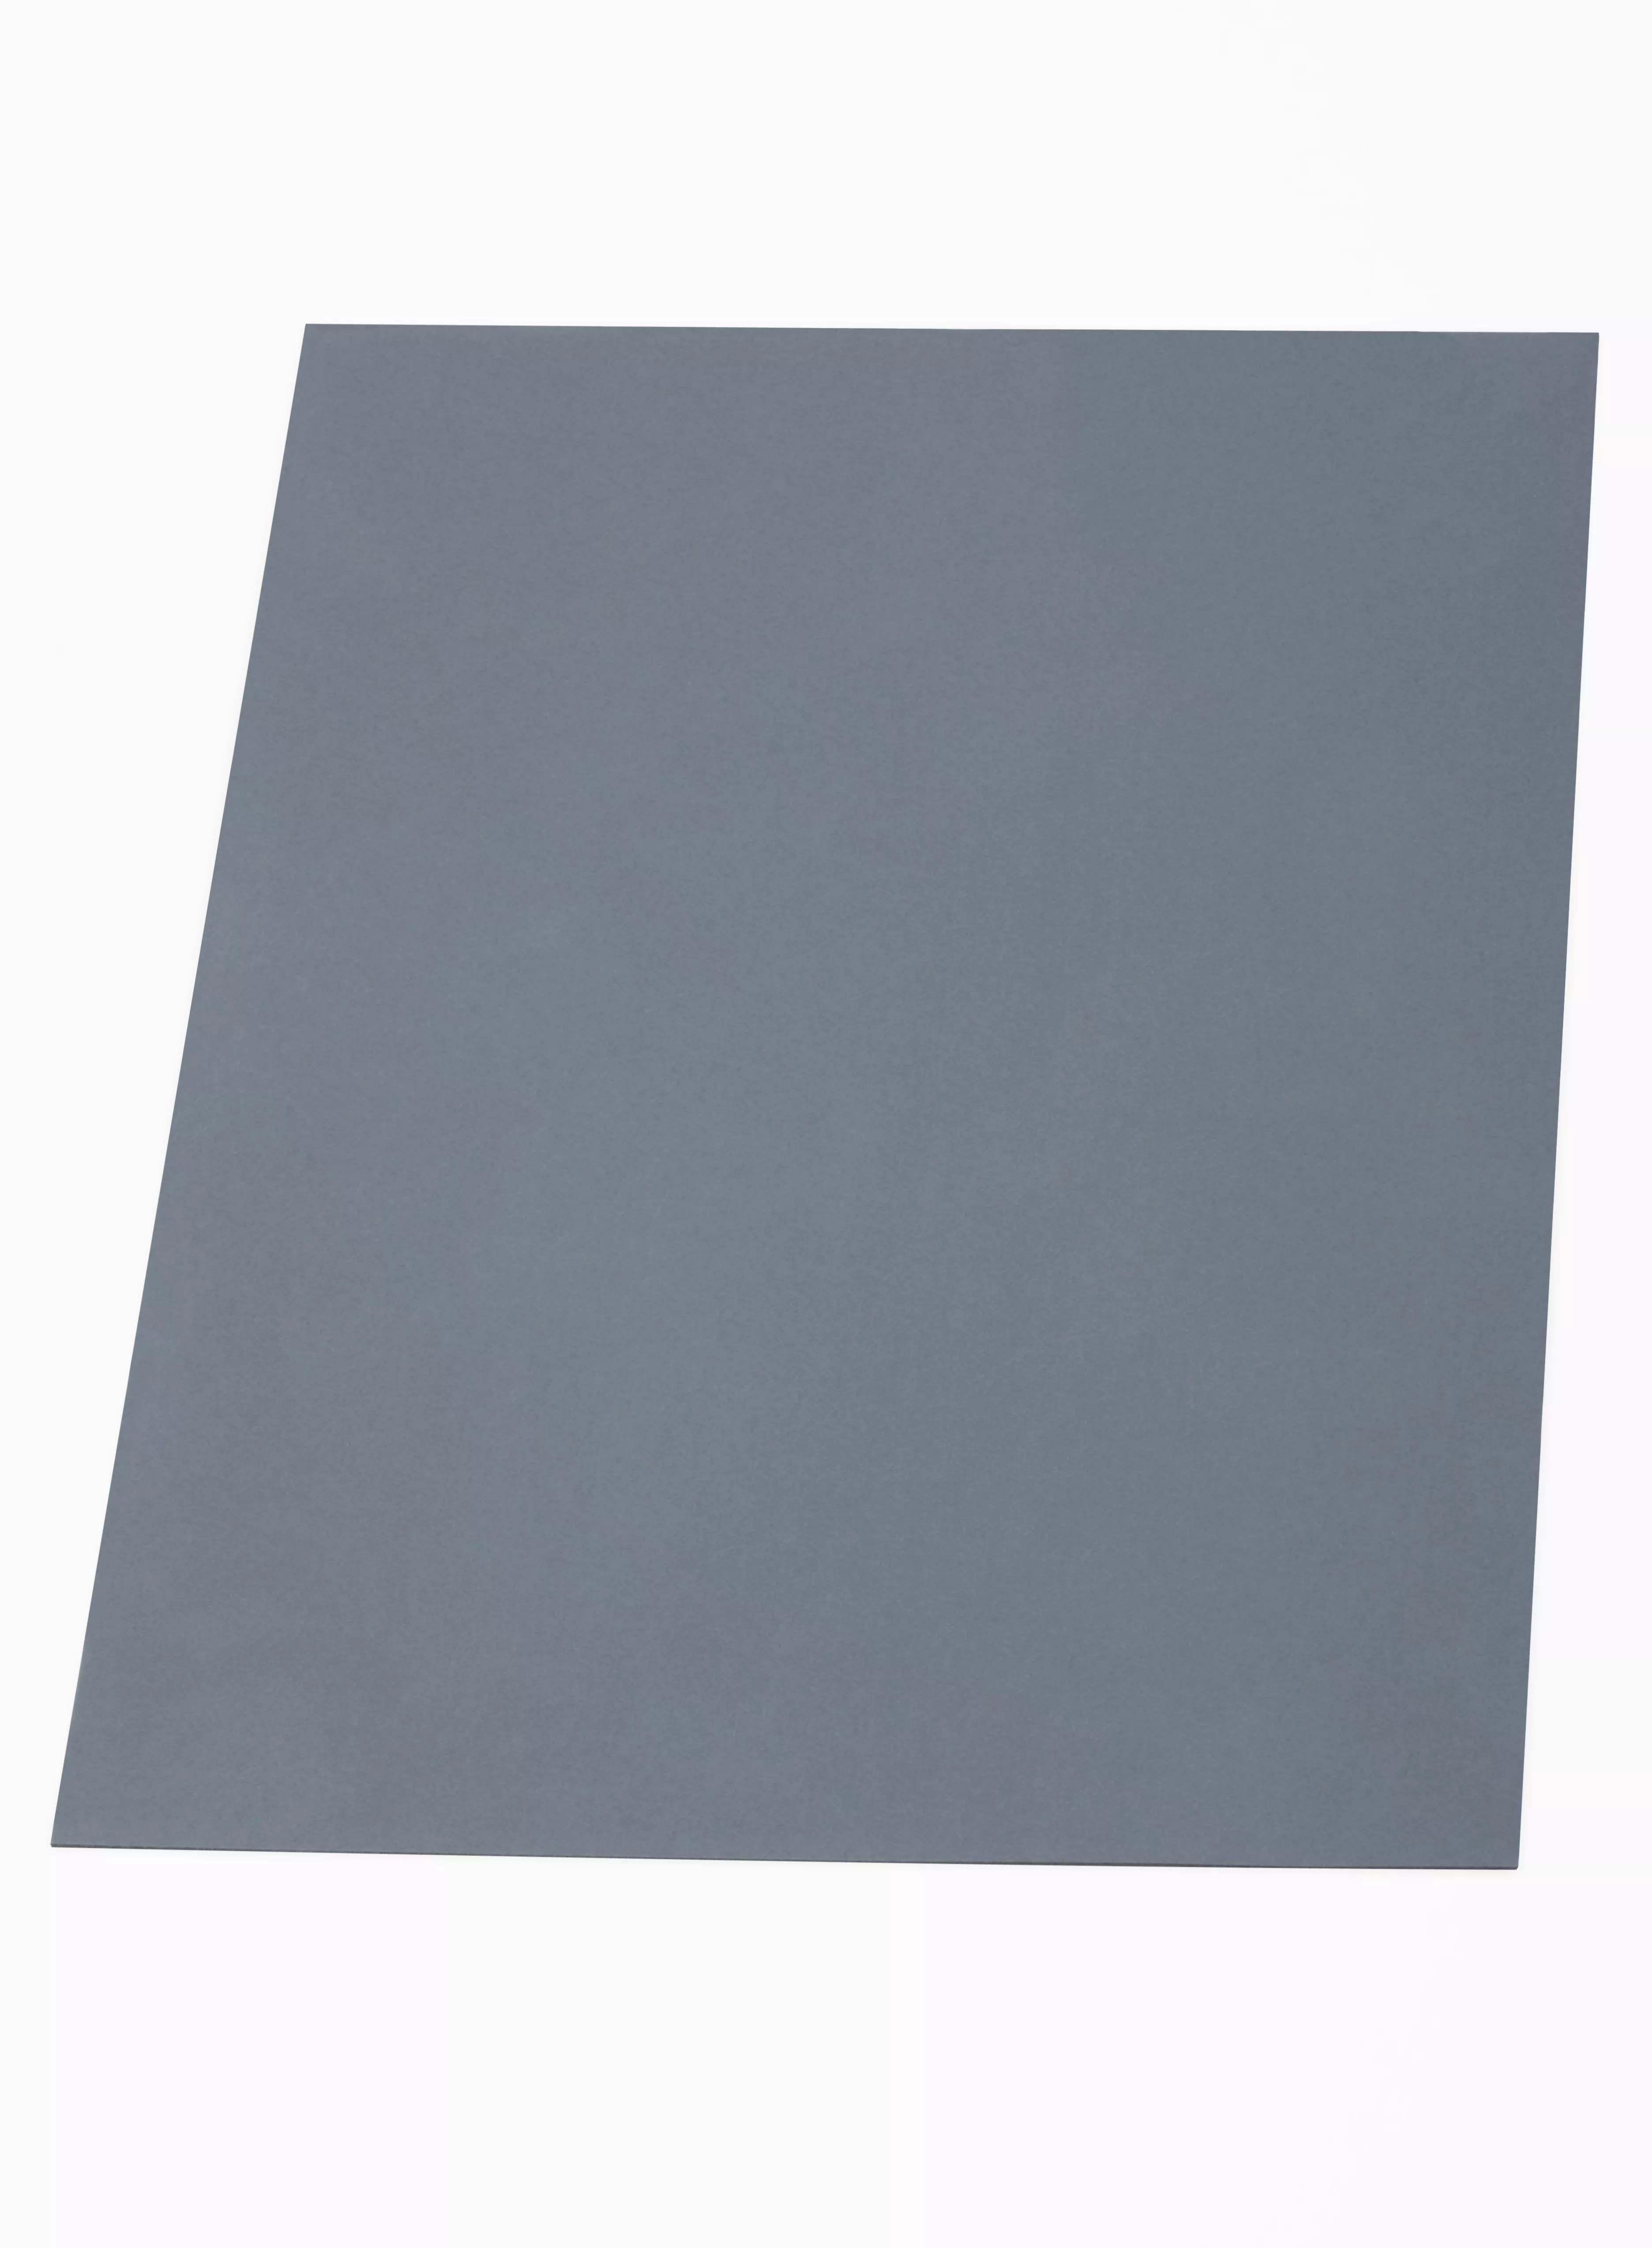 SKU 7010352938 | 3M™ Thermally Conductive Silicone Interface Pad 5549S